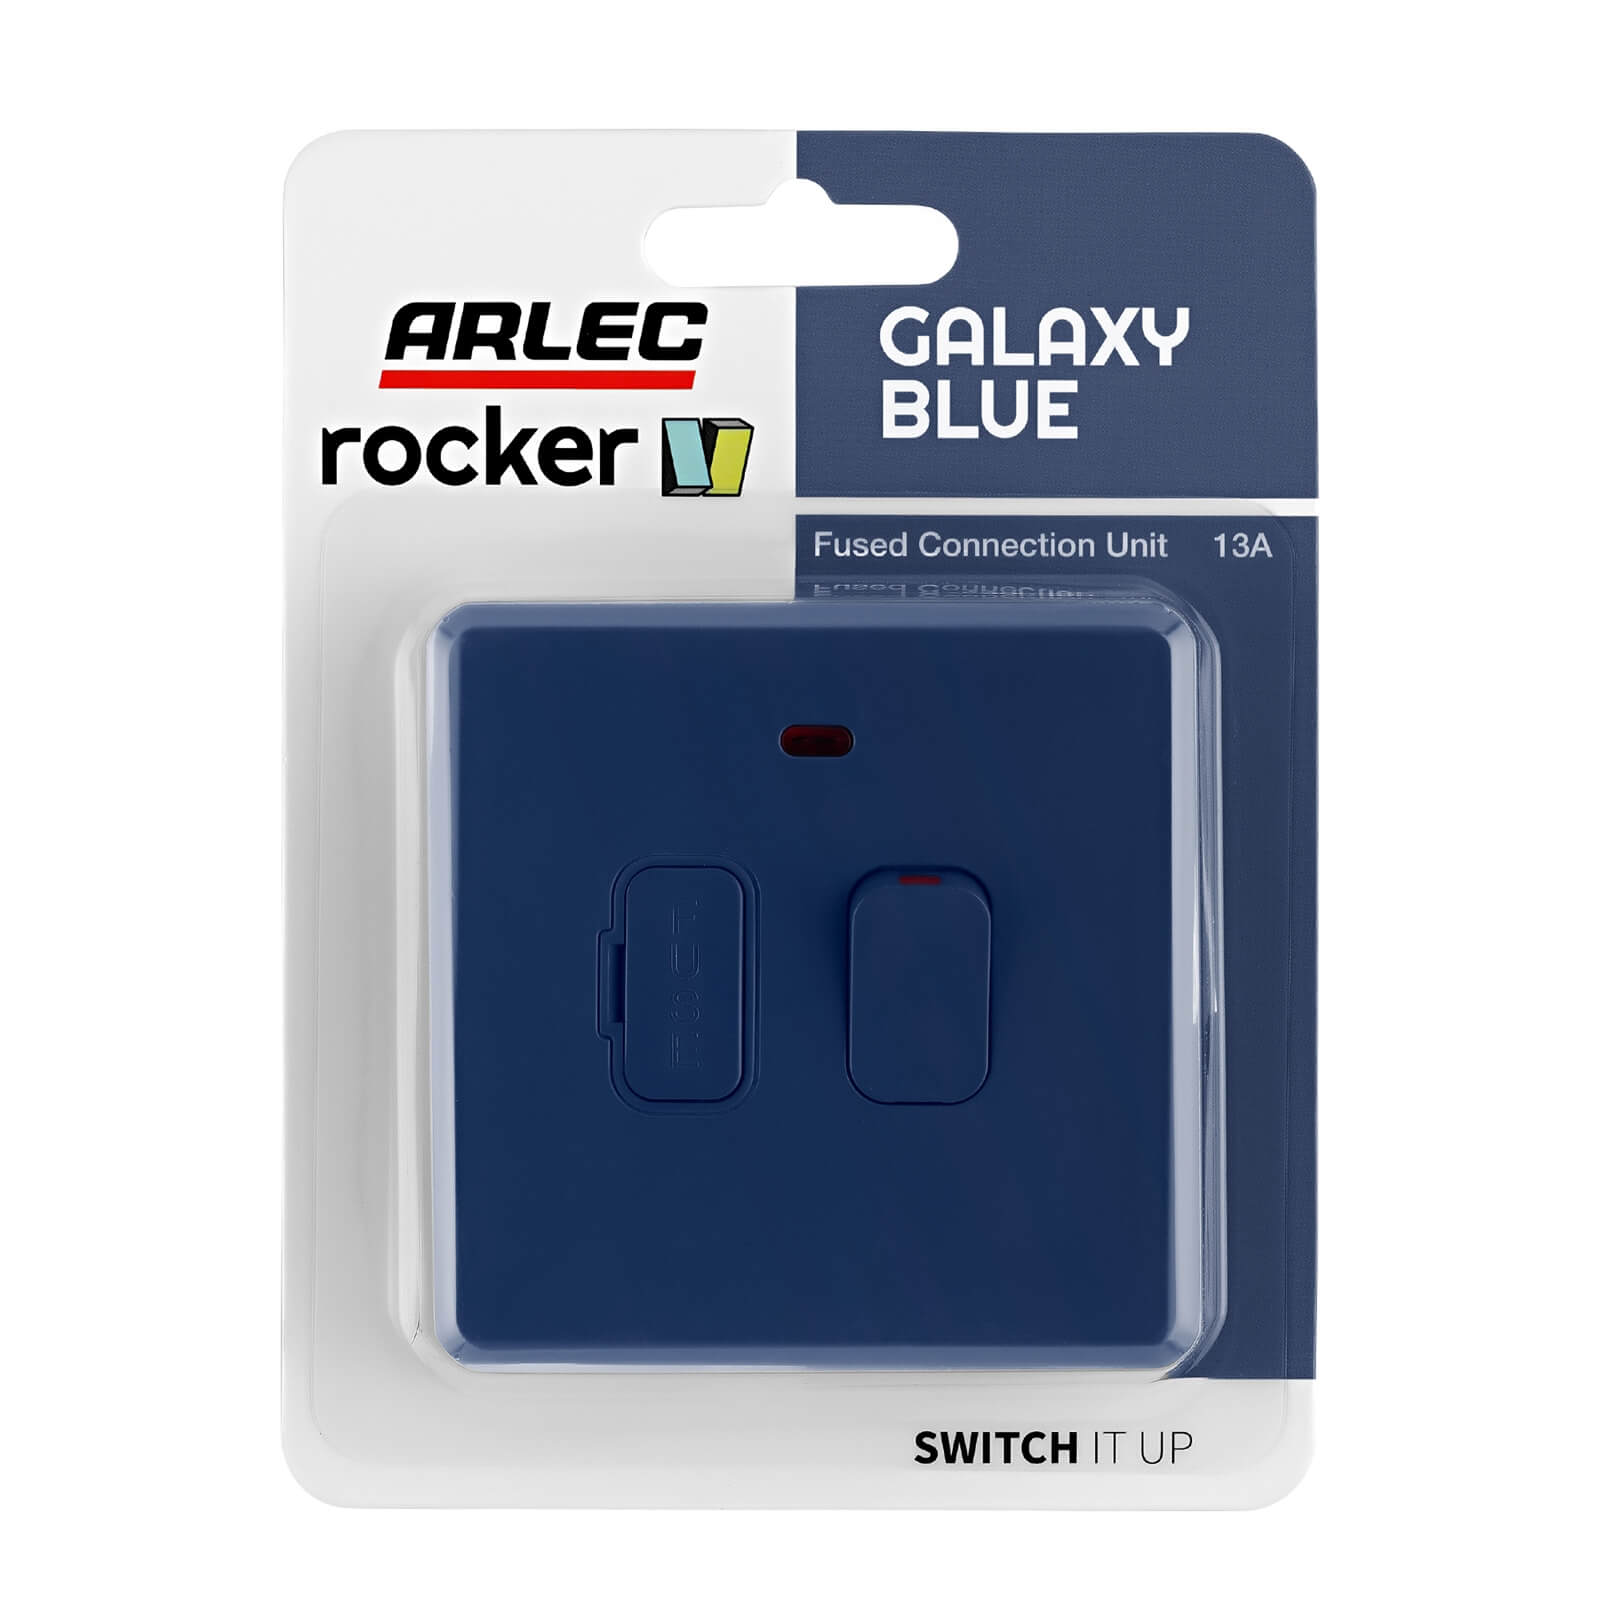 Arlec Rocker  13A Galaxy Blue Switched fused connection unit